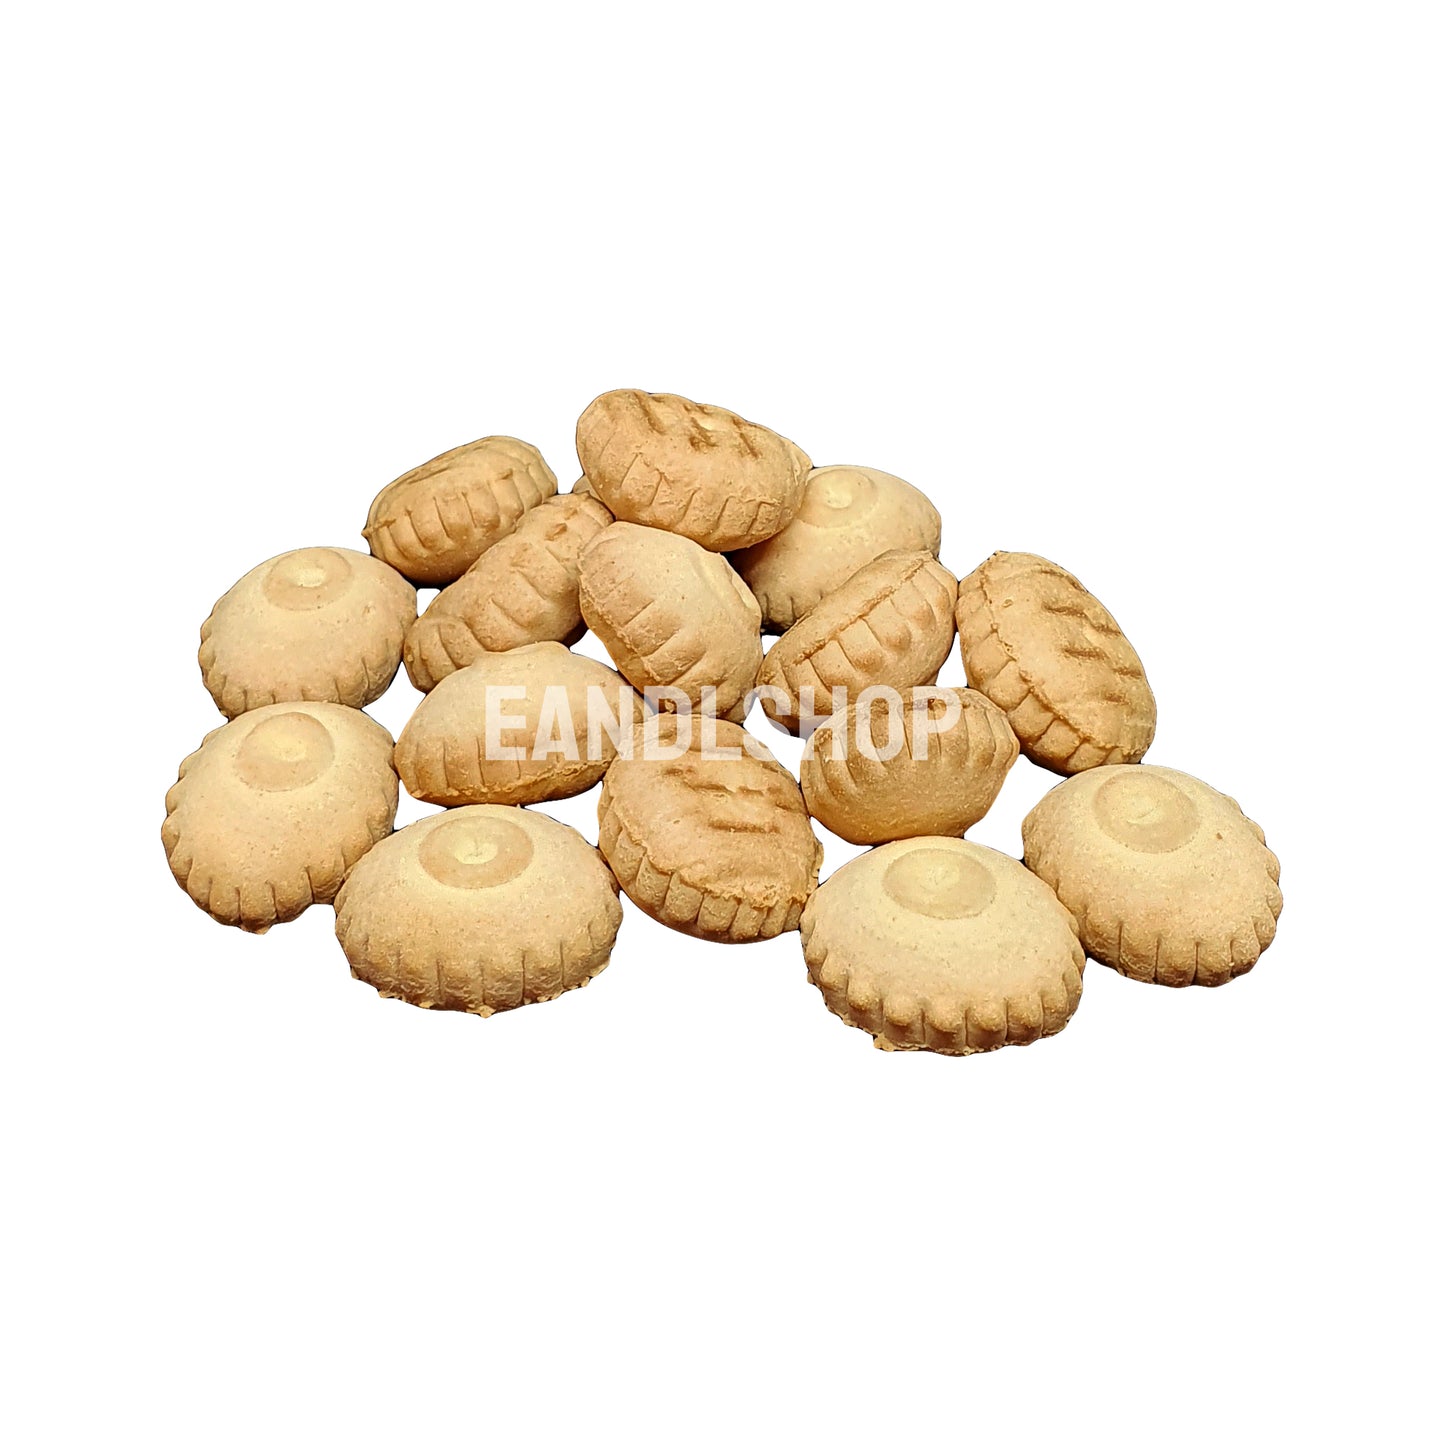 Belly Button (Gem) Biscuit. Old-school biscuits, modern snacks (chips, crackers), cakes, gummies, plums, dried fruits, nuts, herbal tea – available at www.EANDLSHOP.com